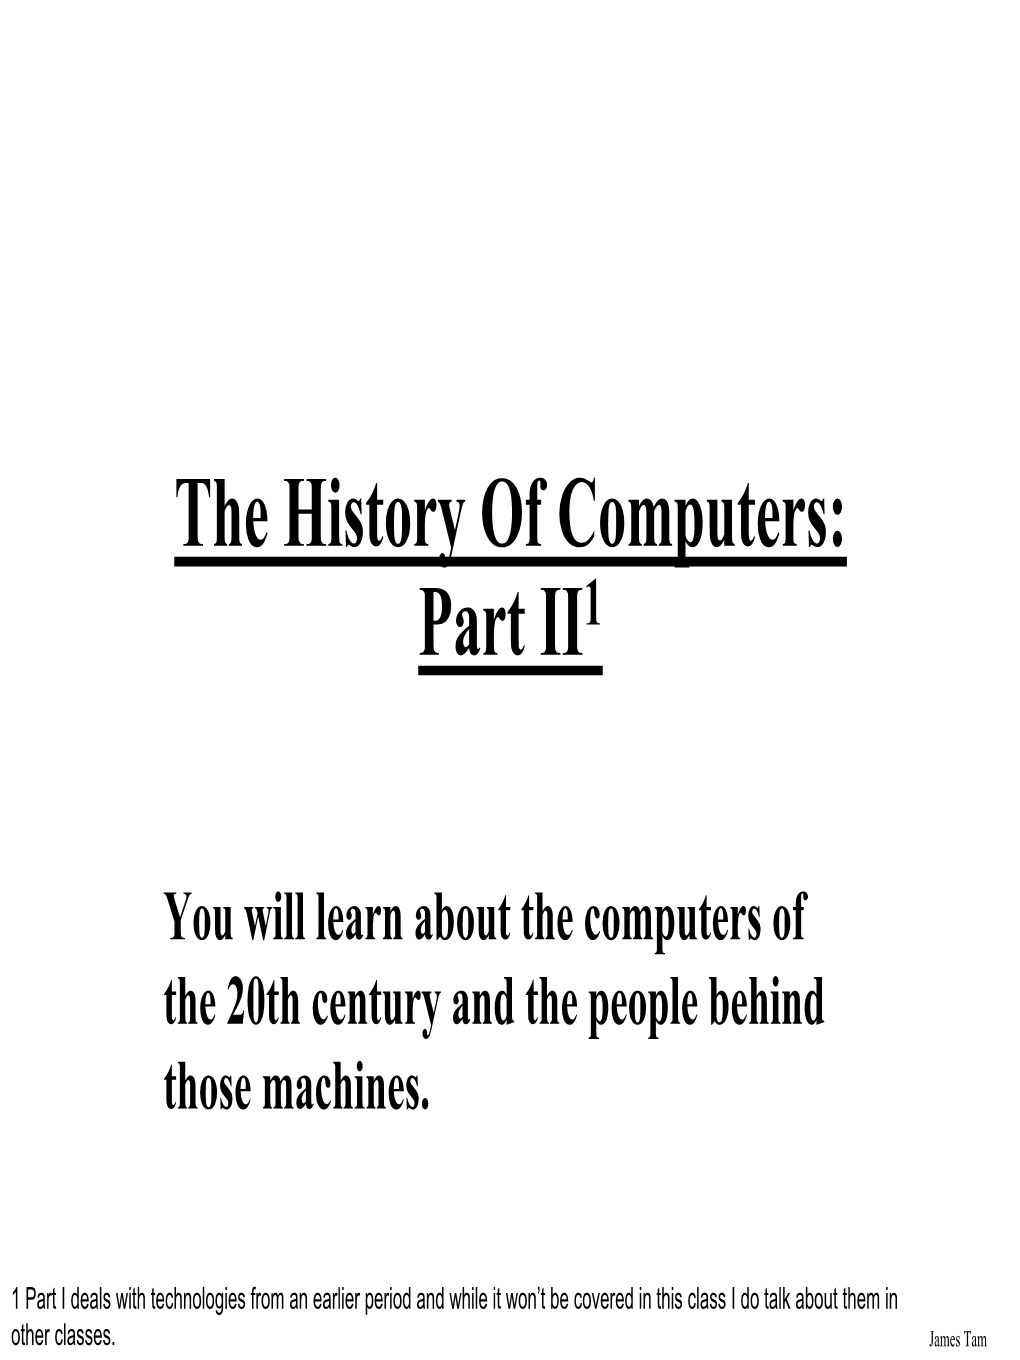 The History of Computers: Part II1